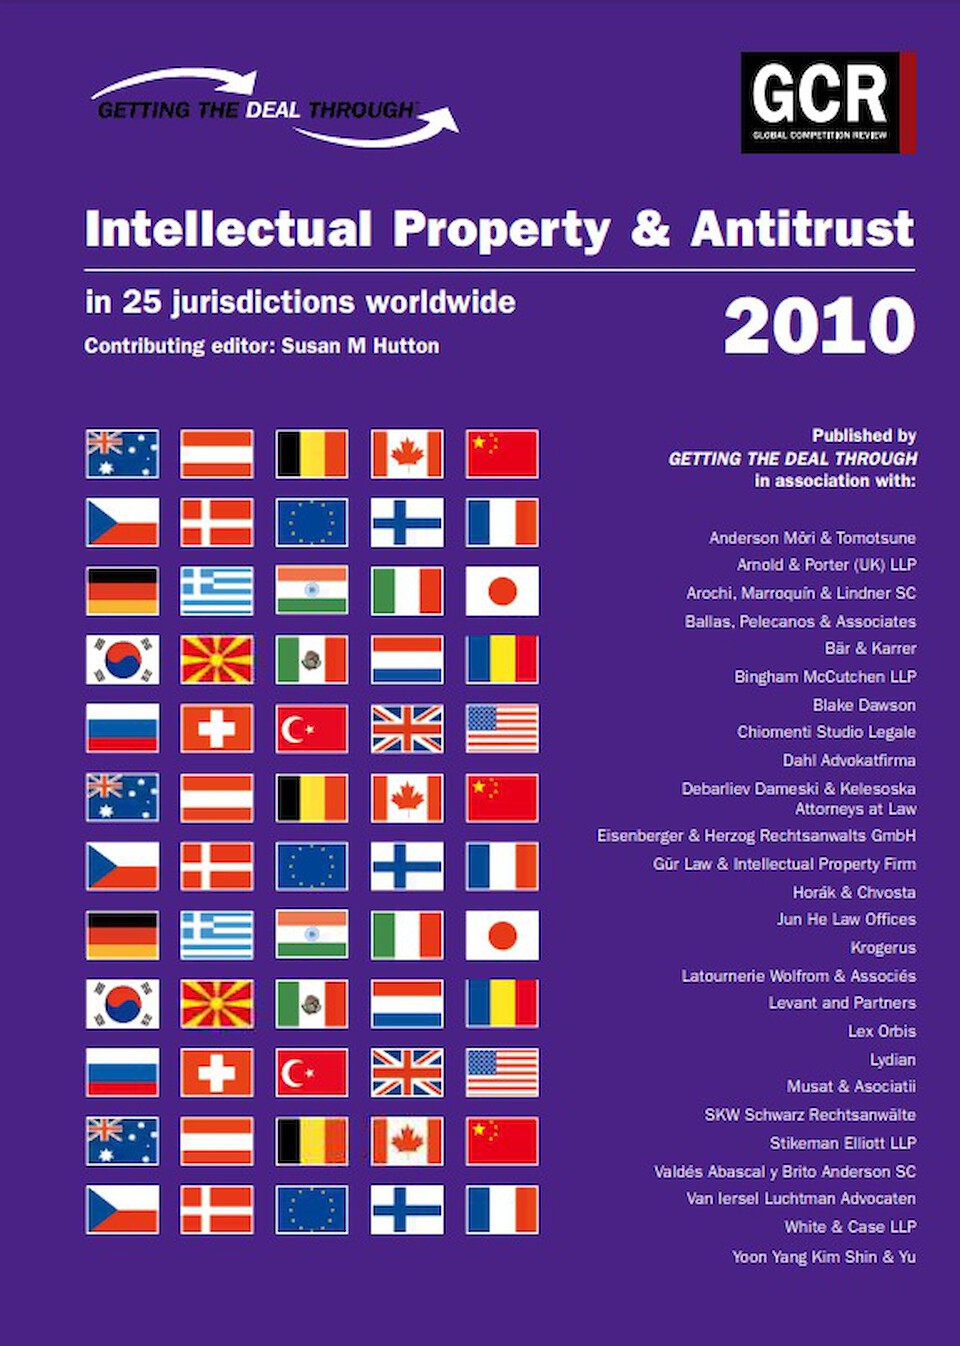 Getting the deal Through: Intellectual Property & Antitrust 2010 Romania